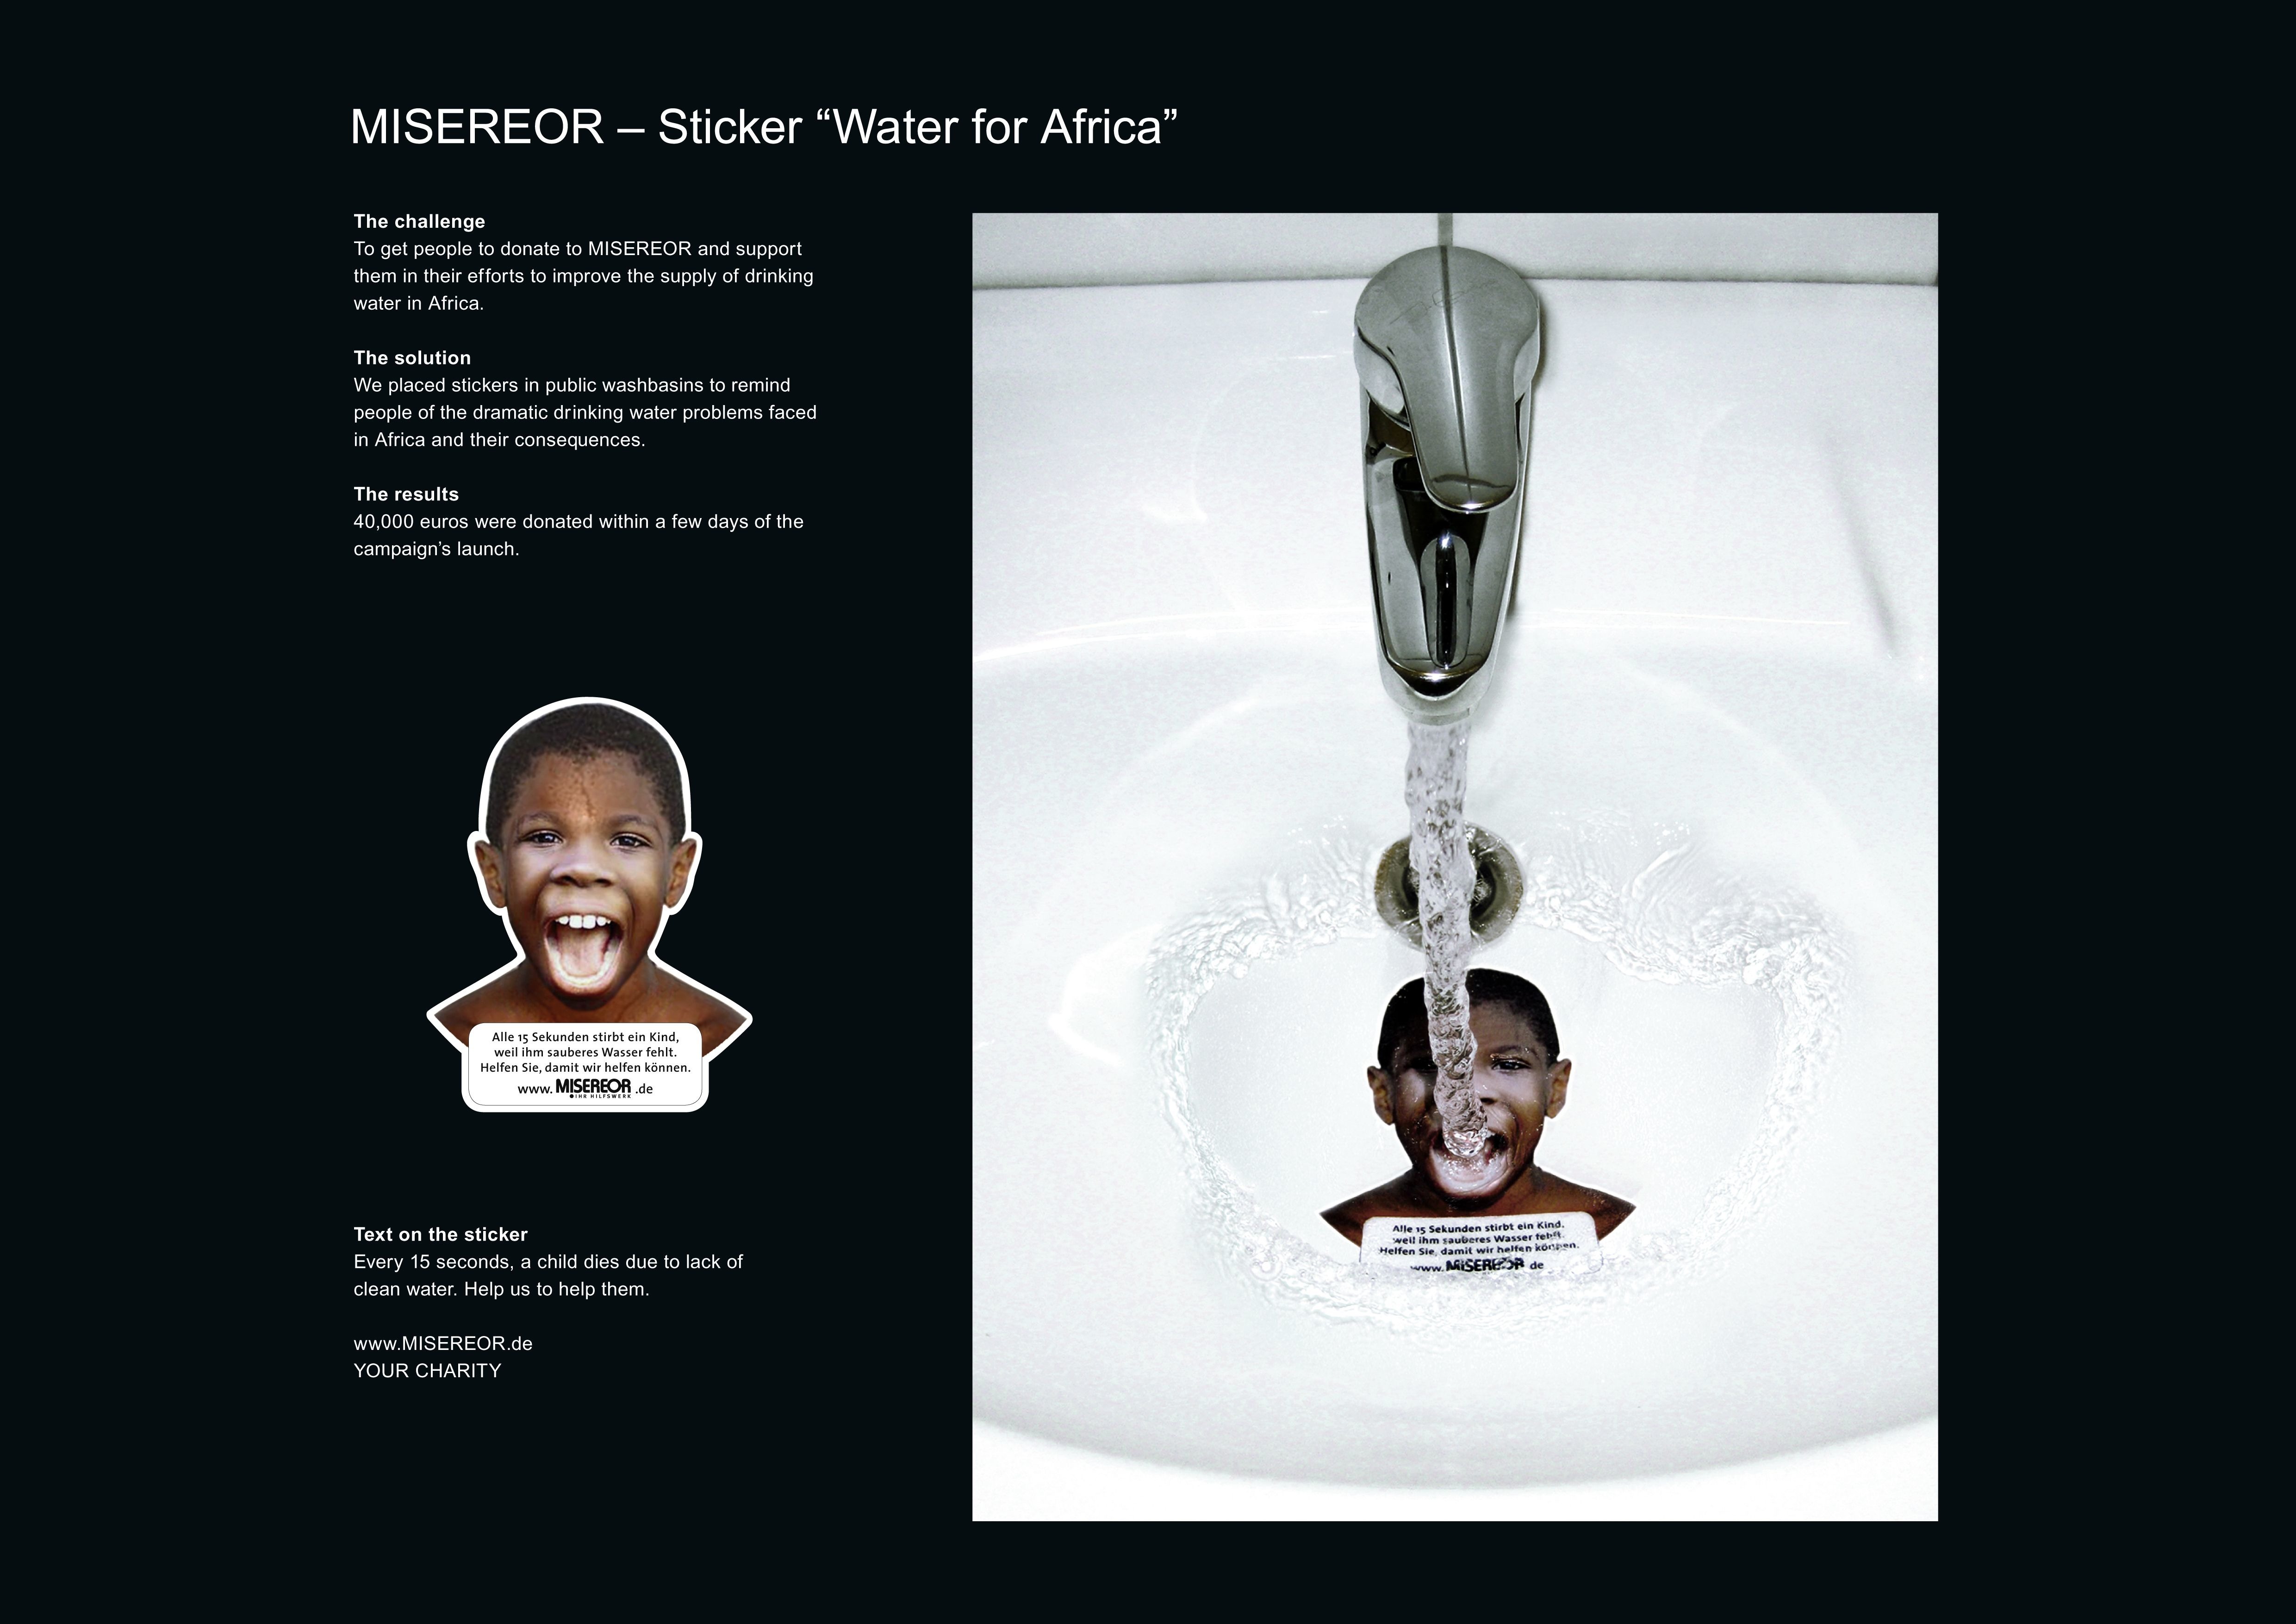 WATER FOR AFRICA